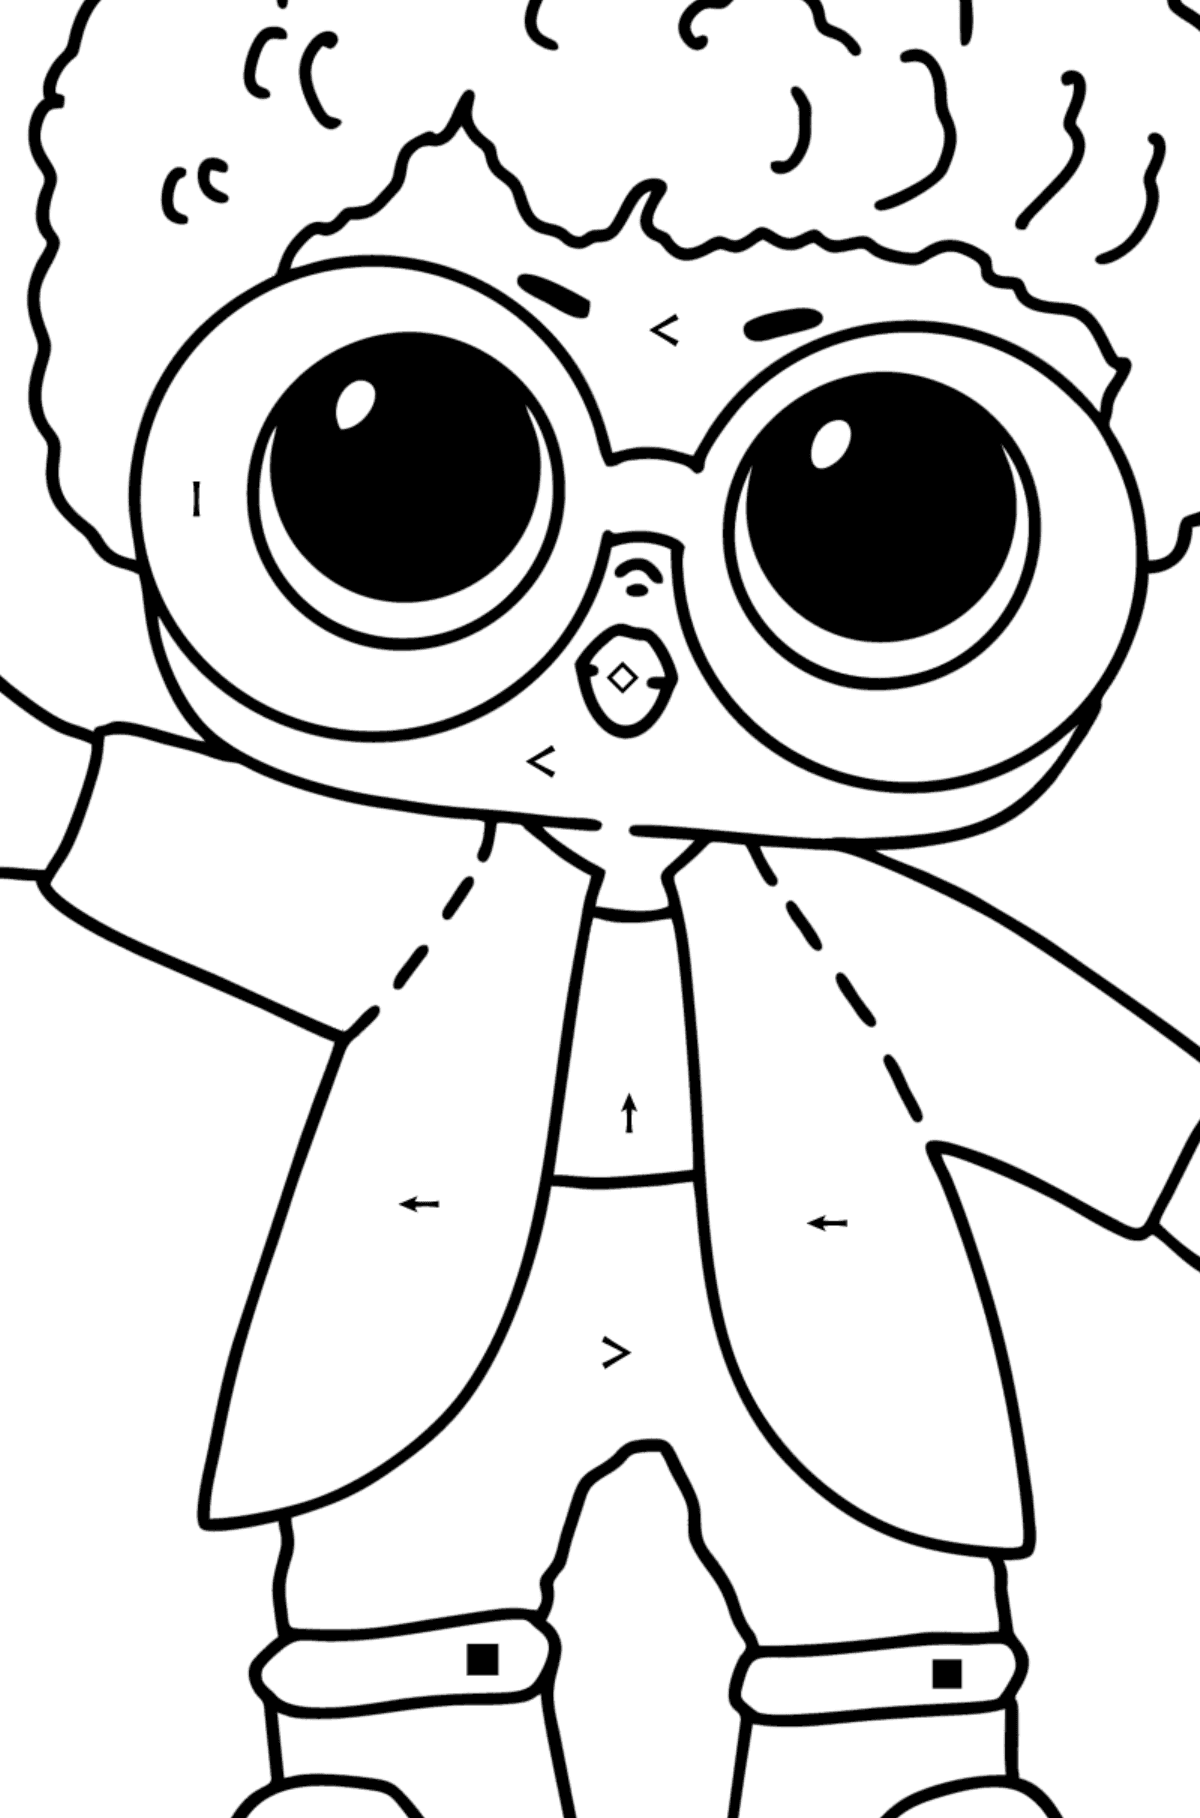 LOL Surprise Purple Reign Doll Boy coloring page - Coloring by Symbols for Kids